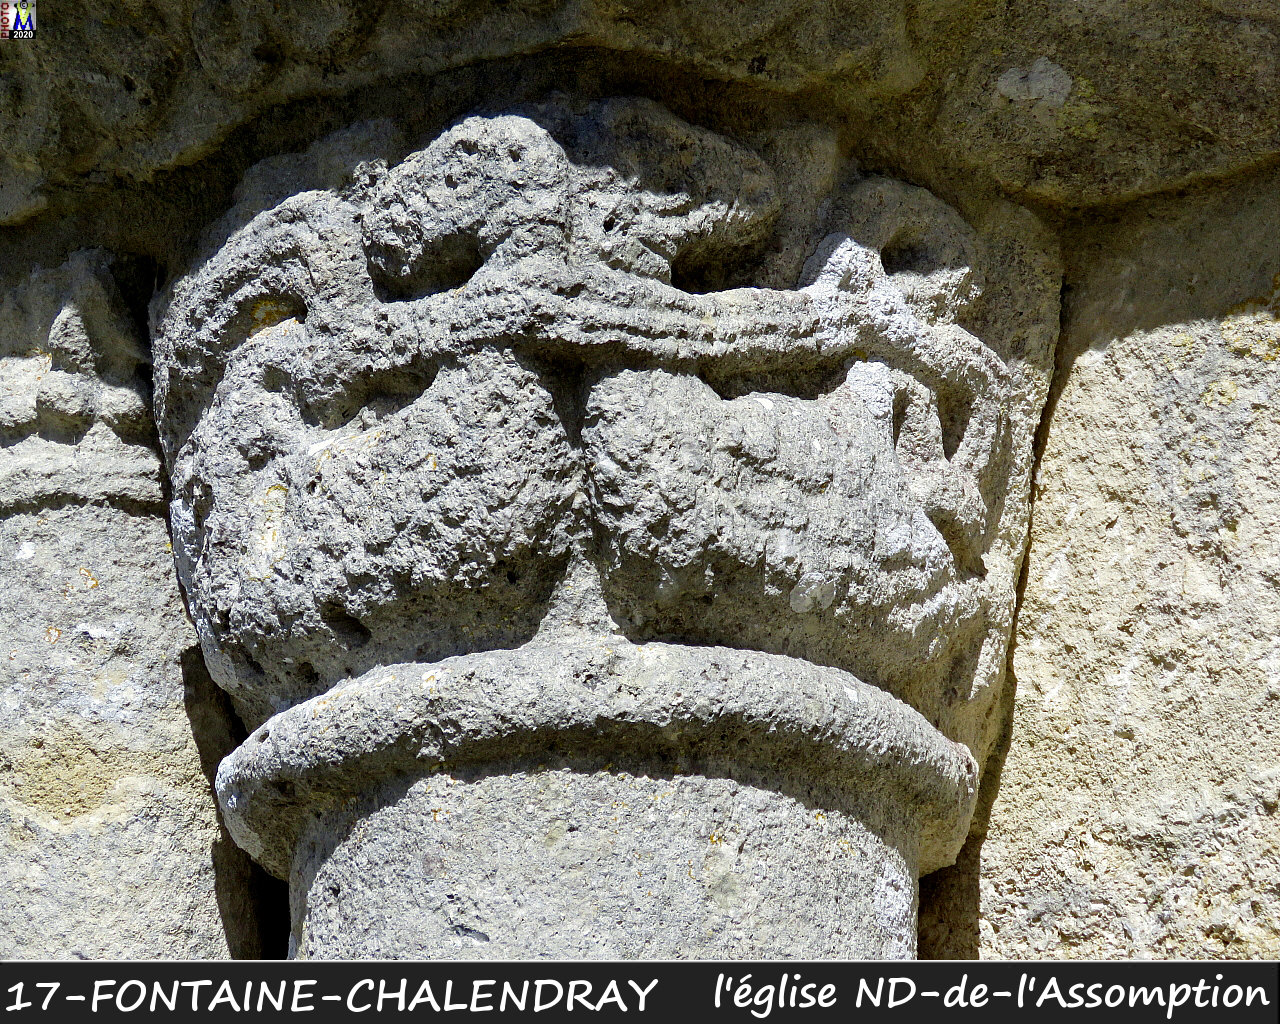 17FONTAINE-CHALENDRAY_eglise_1032.jpg